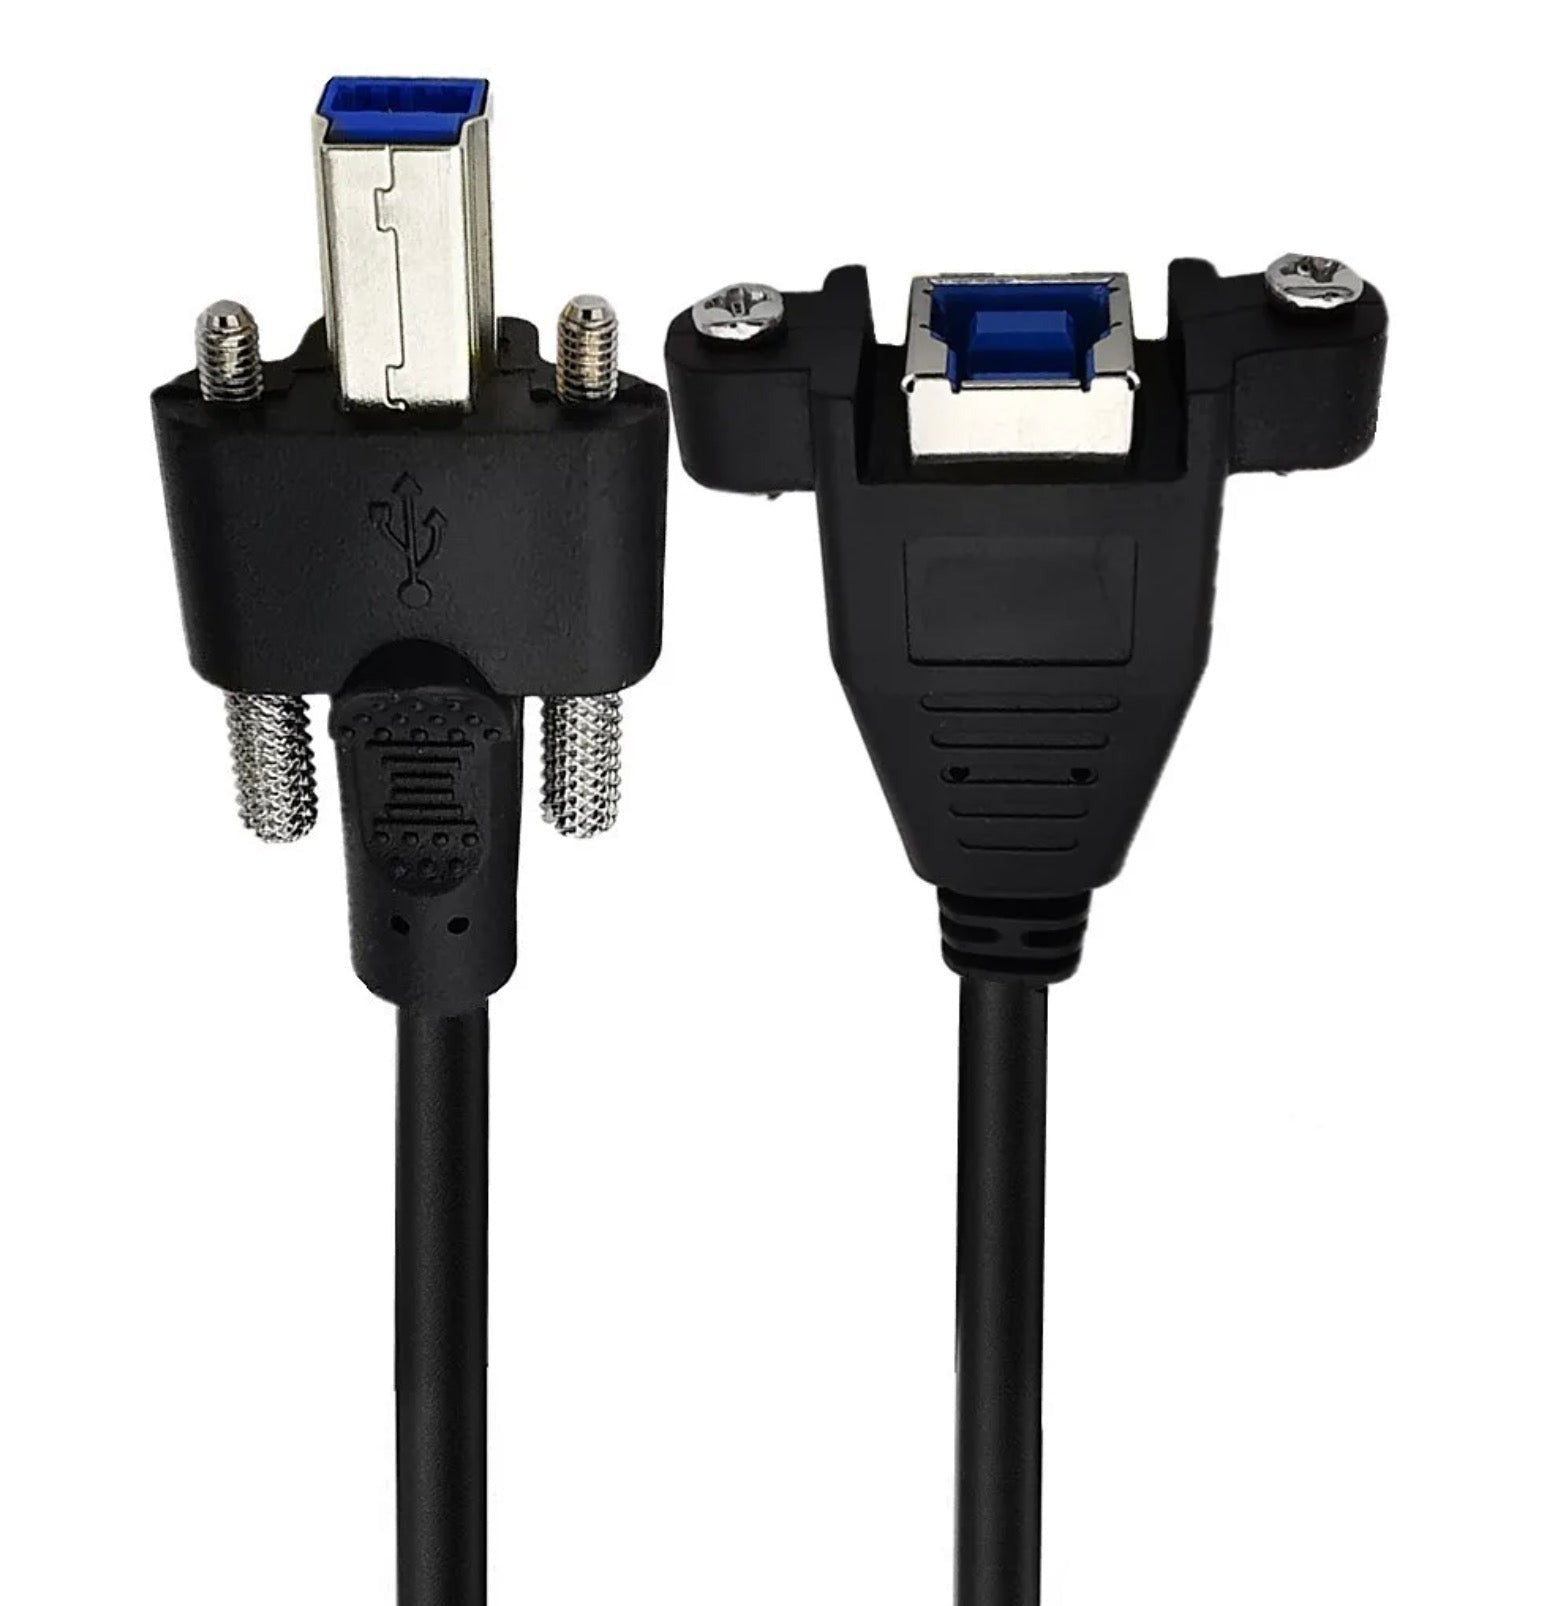 USB 3.0 B Male to B Female Panel Mount Printer Extension Cable